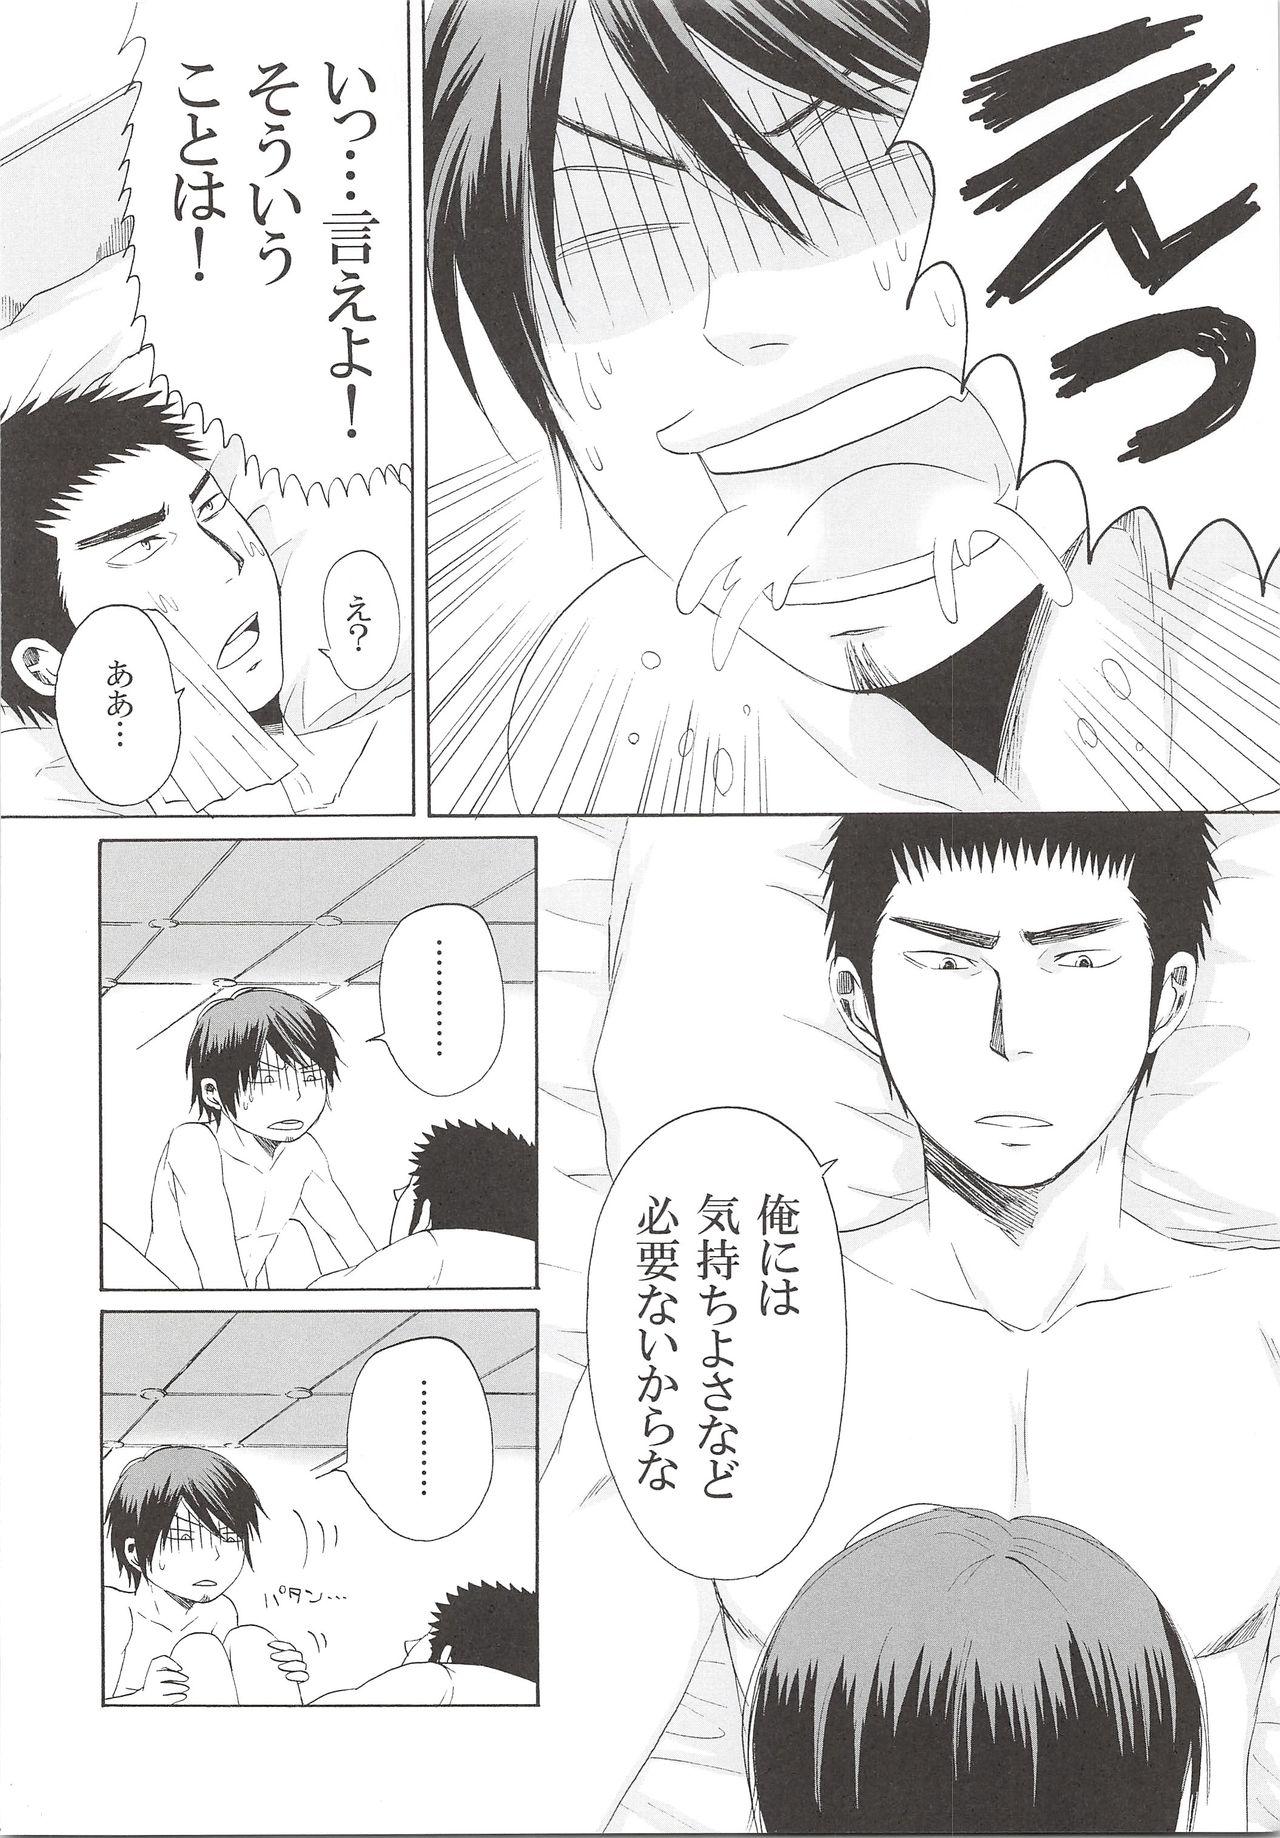 Asses THE LONGEST DAY - Daiya no ace Arabe - Page 5